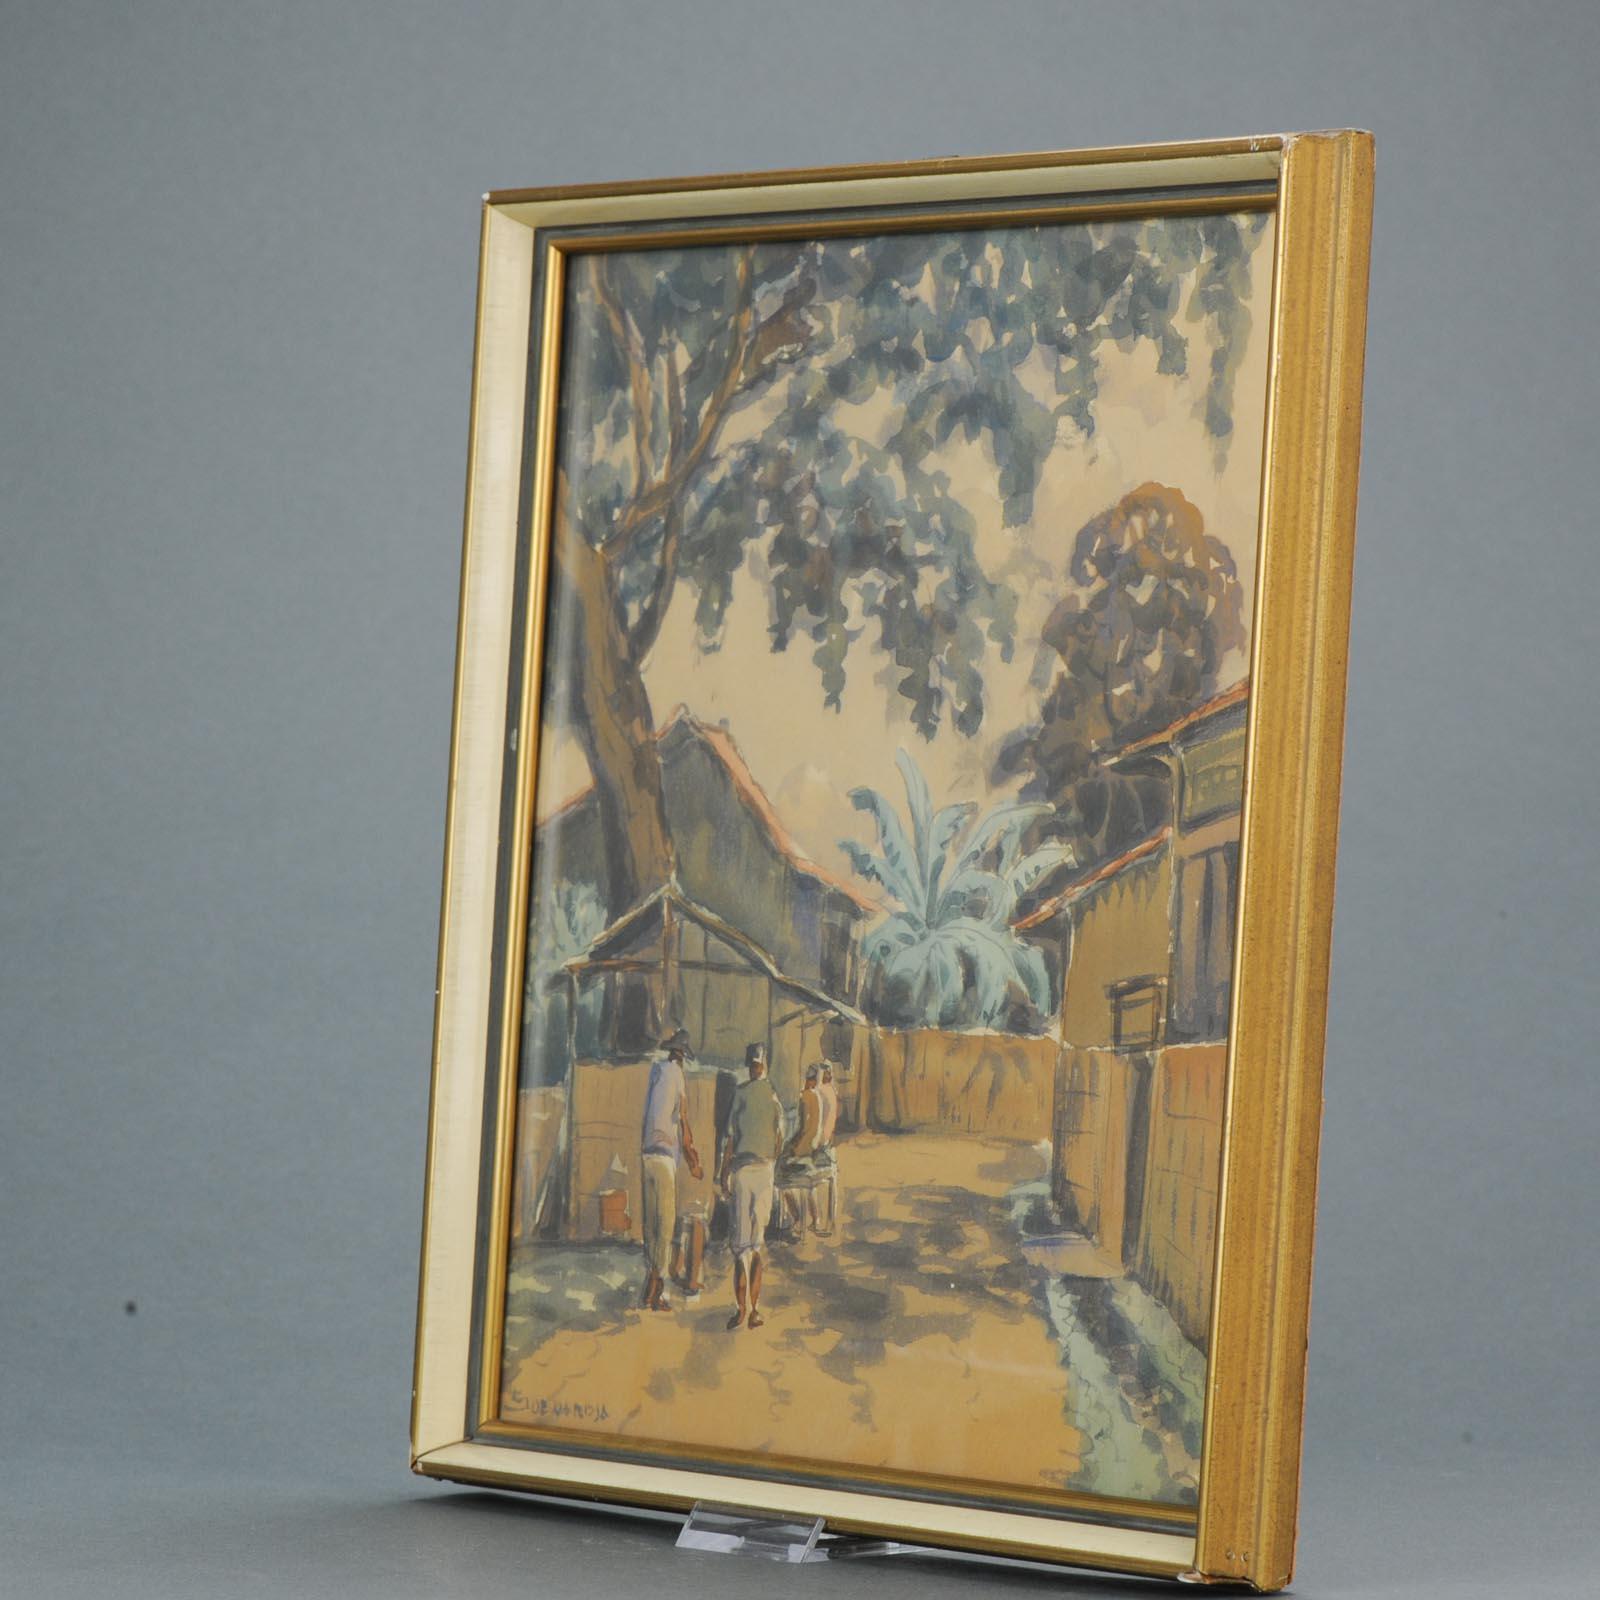 Interesting and finely painted Indonesian painting.

Additional information:
Type: Paintings, Scrolls & Prints
Region of Origin: China
Country of Manufacturing: Indonesia
Period: 20th century
Original/Reproduction: Original
Condition: Overall